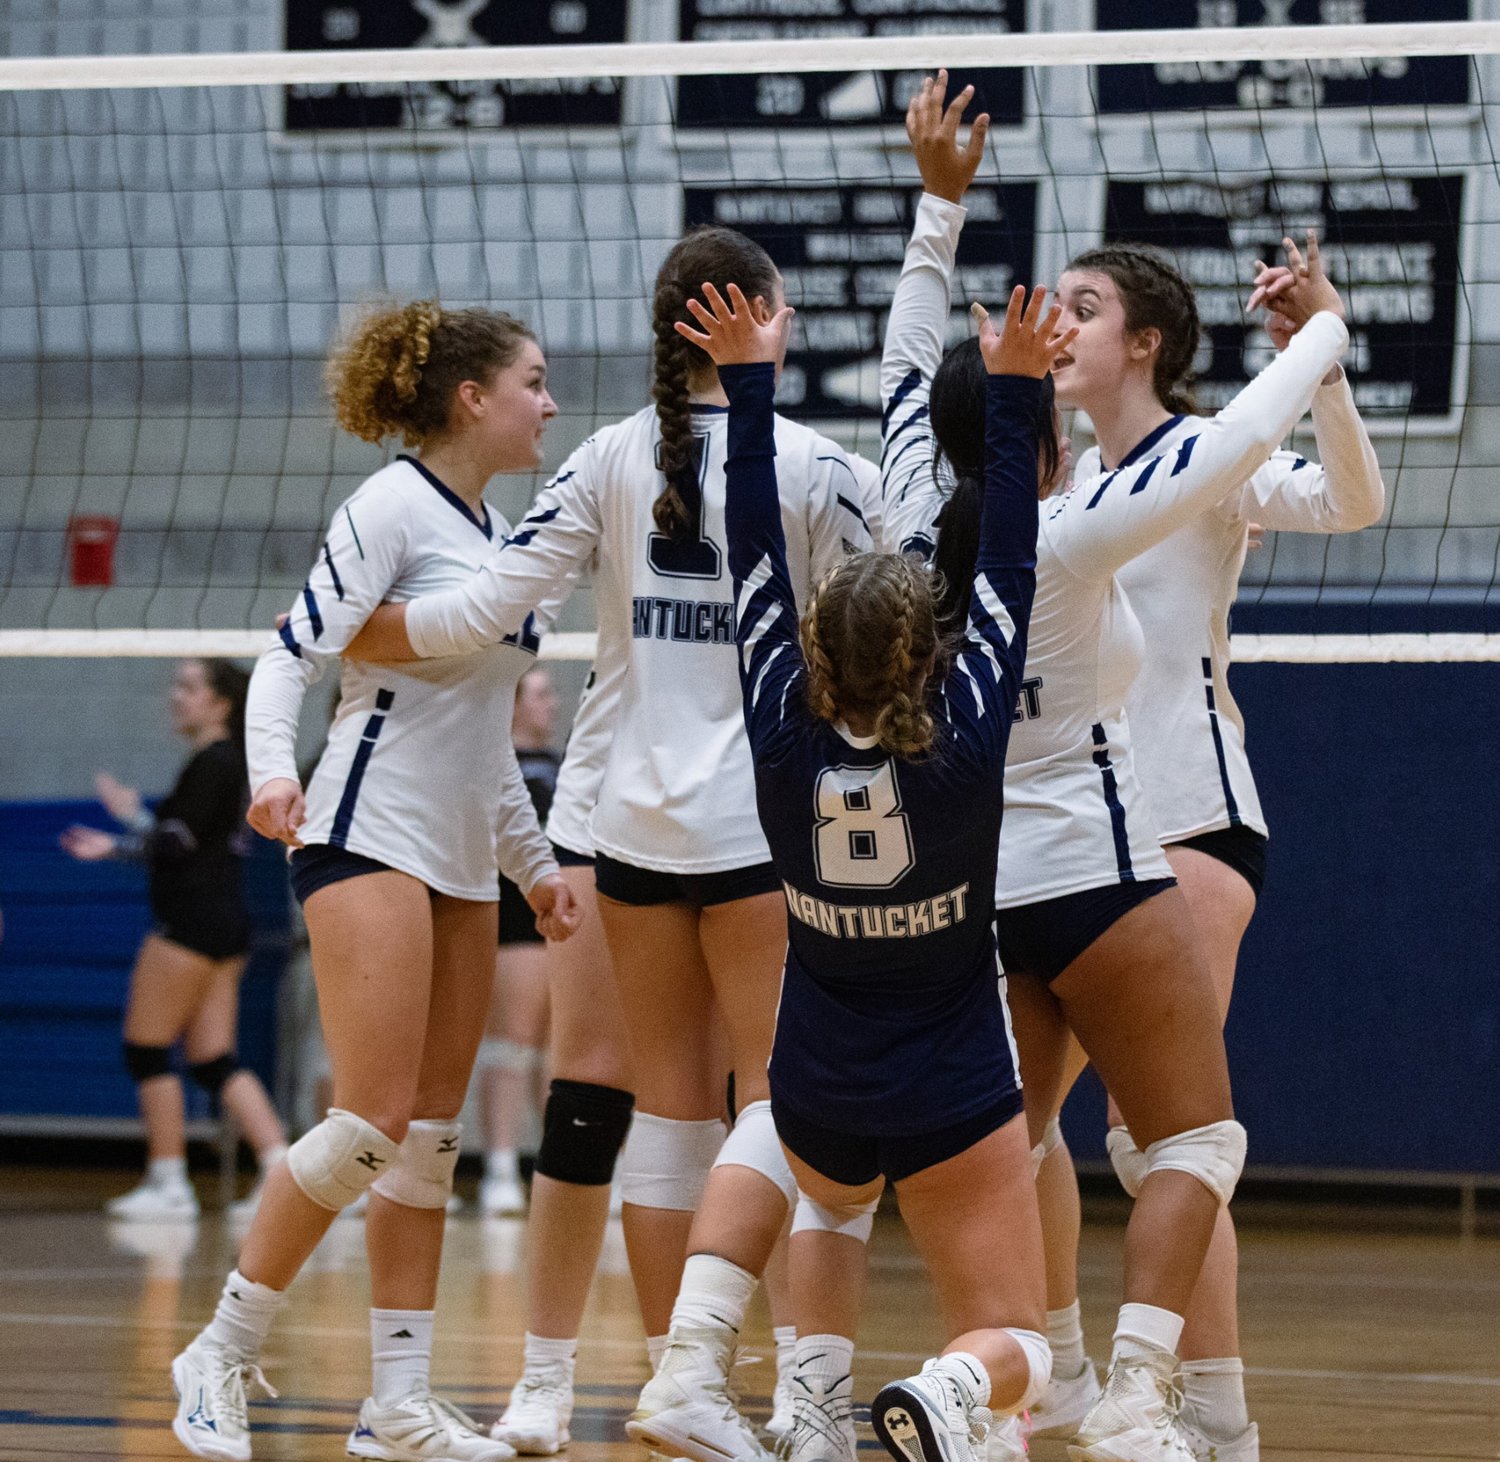 Nantucket beat Blackstone Valley 3-1 Monday to advance to the quarterfinals of the Div. 4 state tournament.